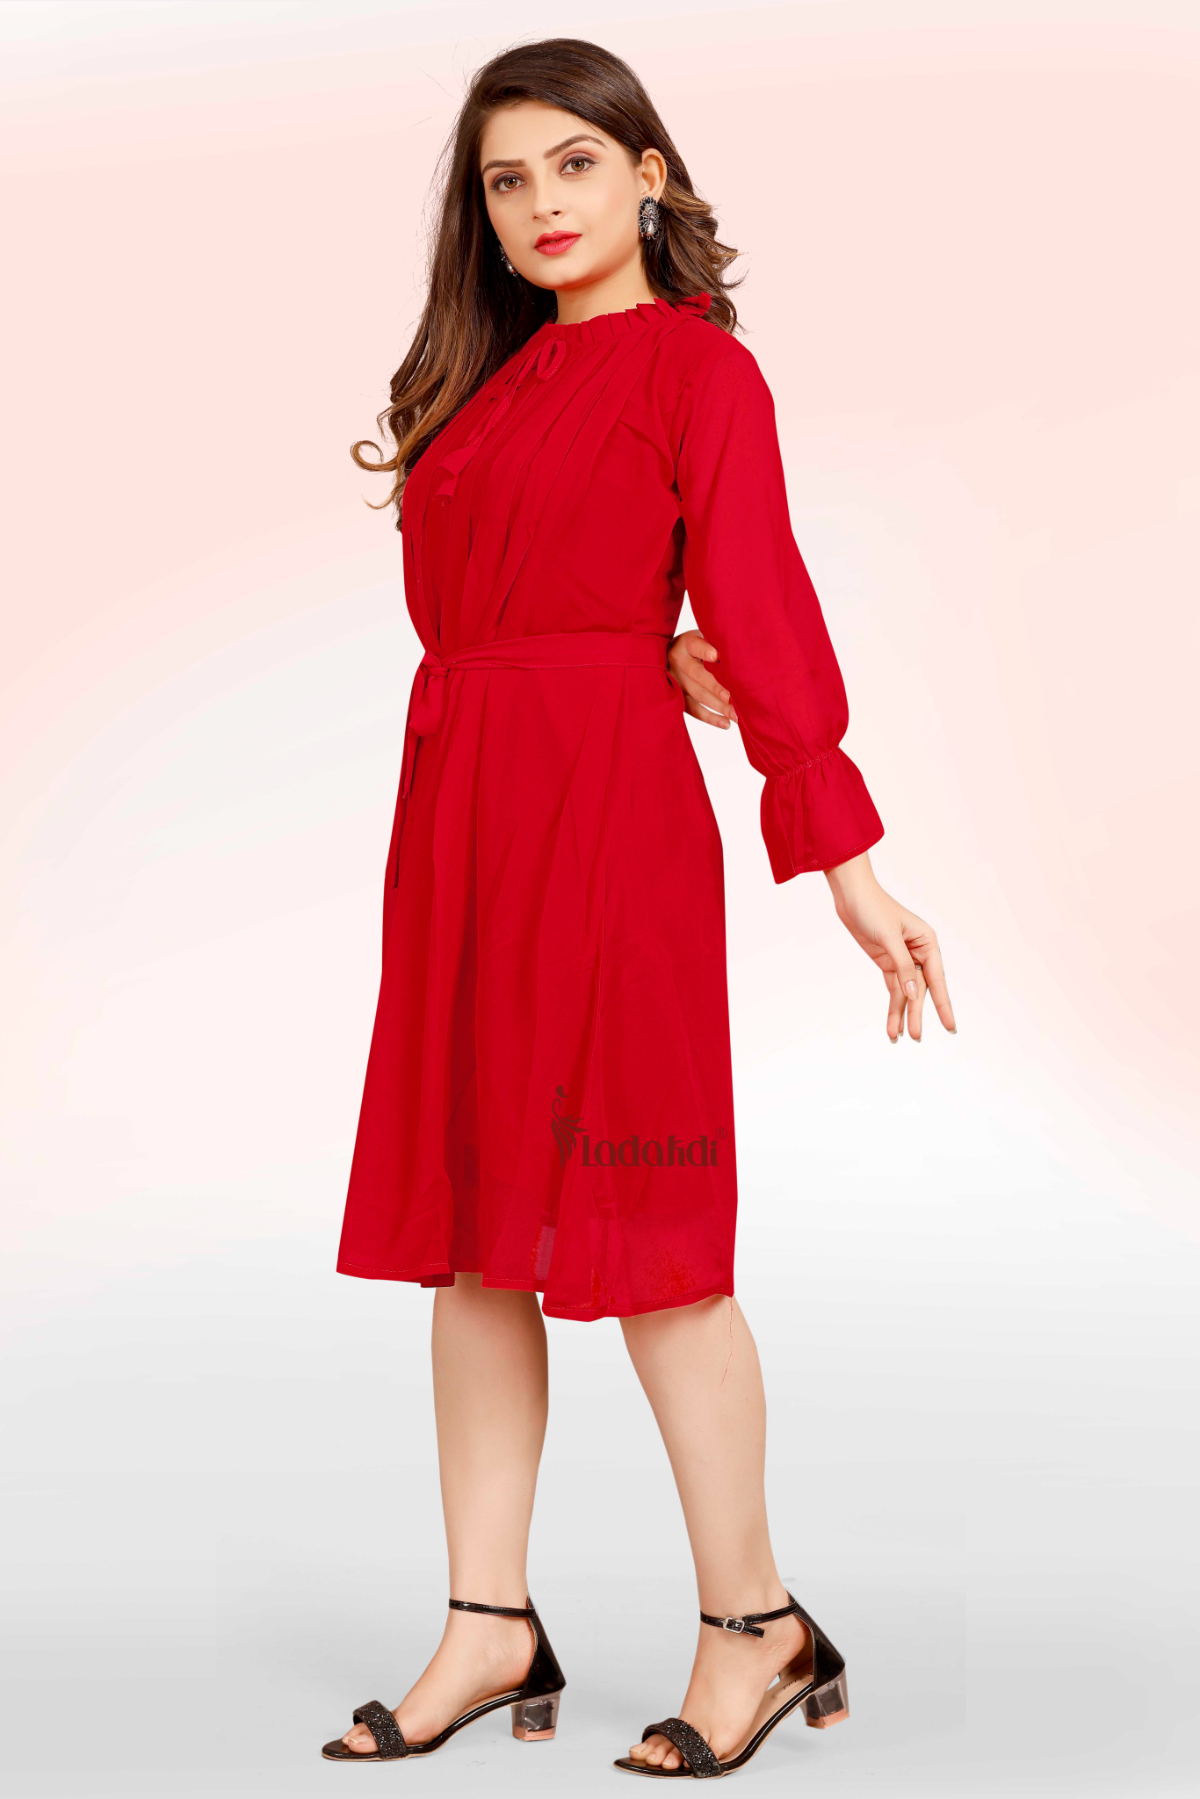 Plain red one piece dress at best price in Surat | ID: 23100800297